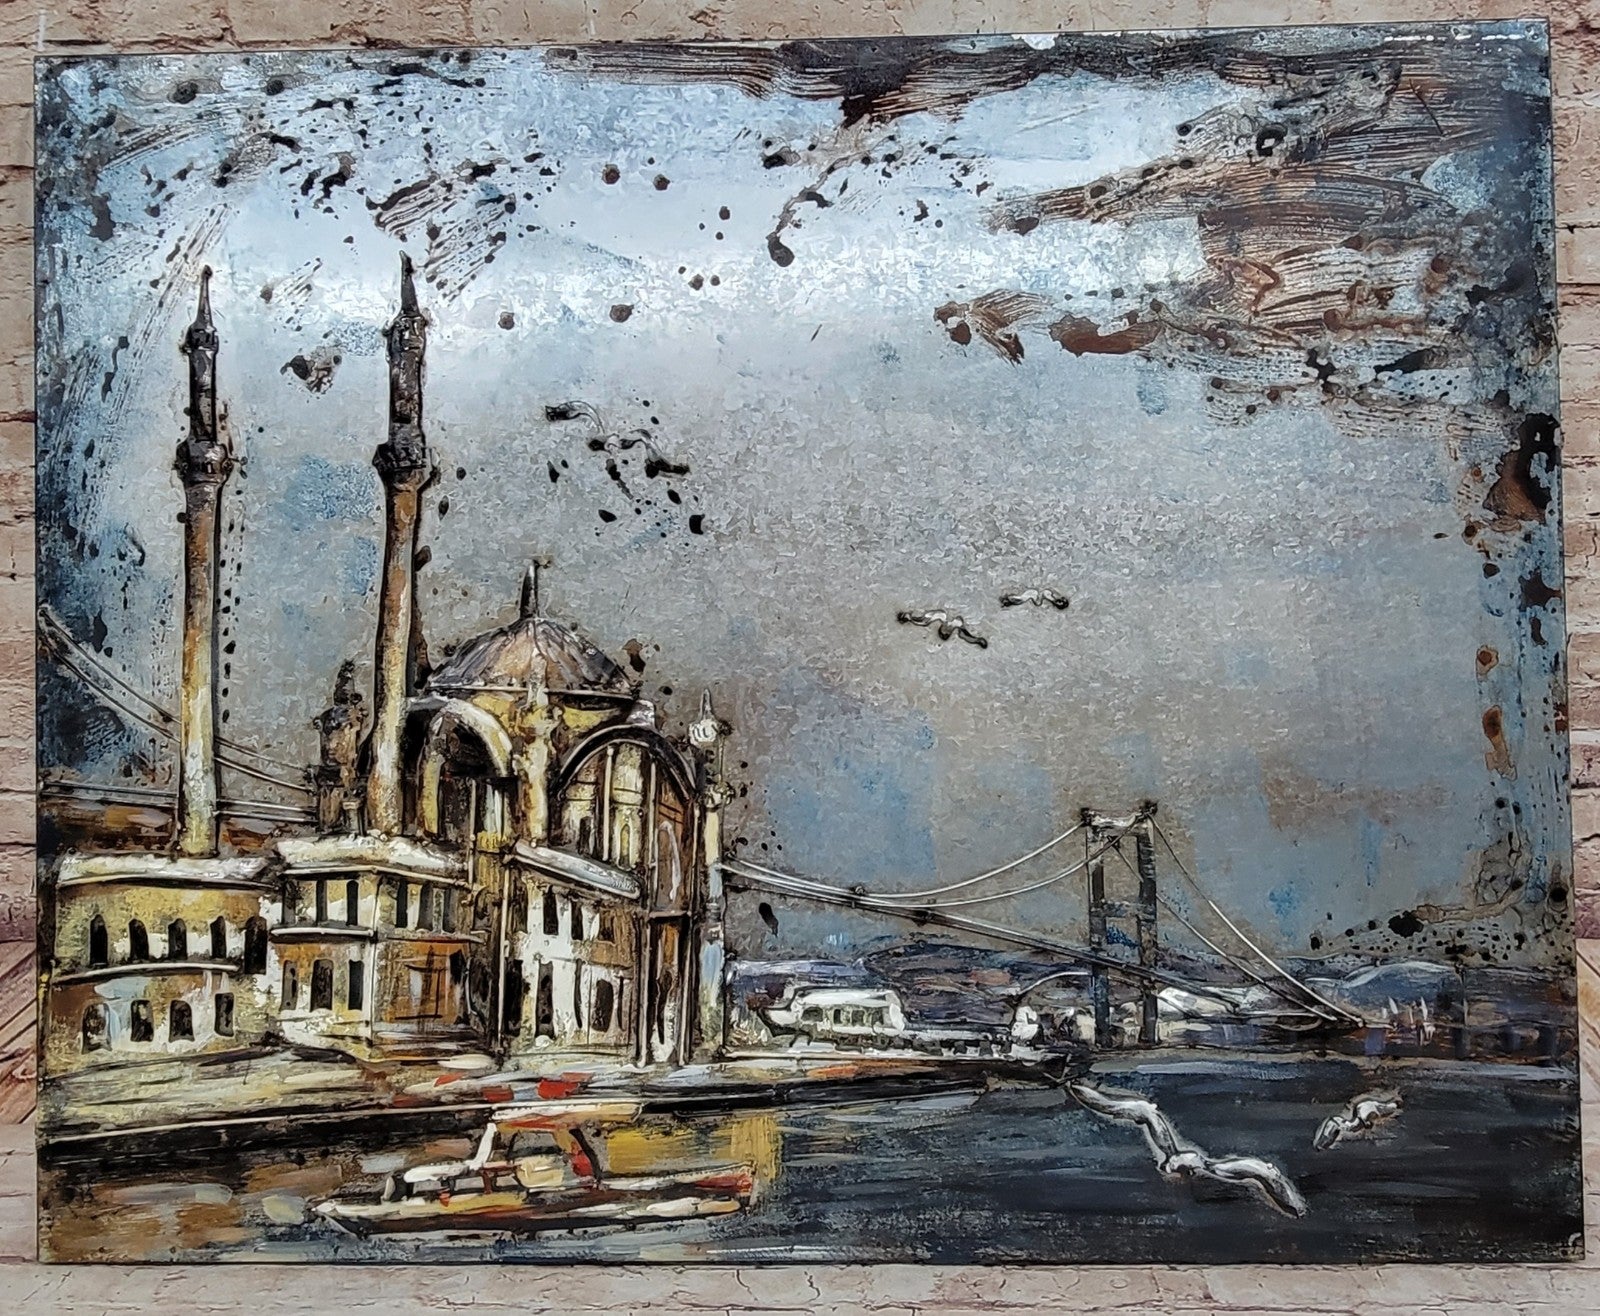 Beautiful Decorative Wall Hanging Painting Istanbul 3D 32 by 40 Inches Art